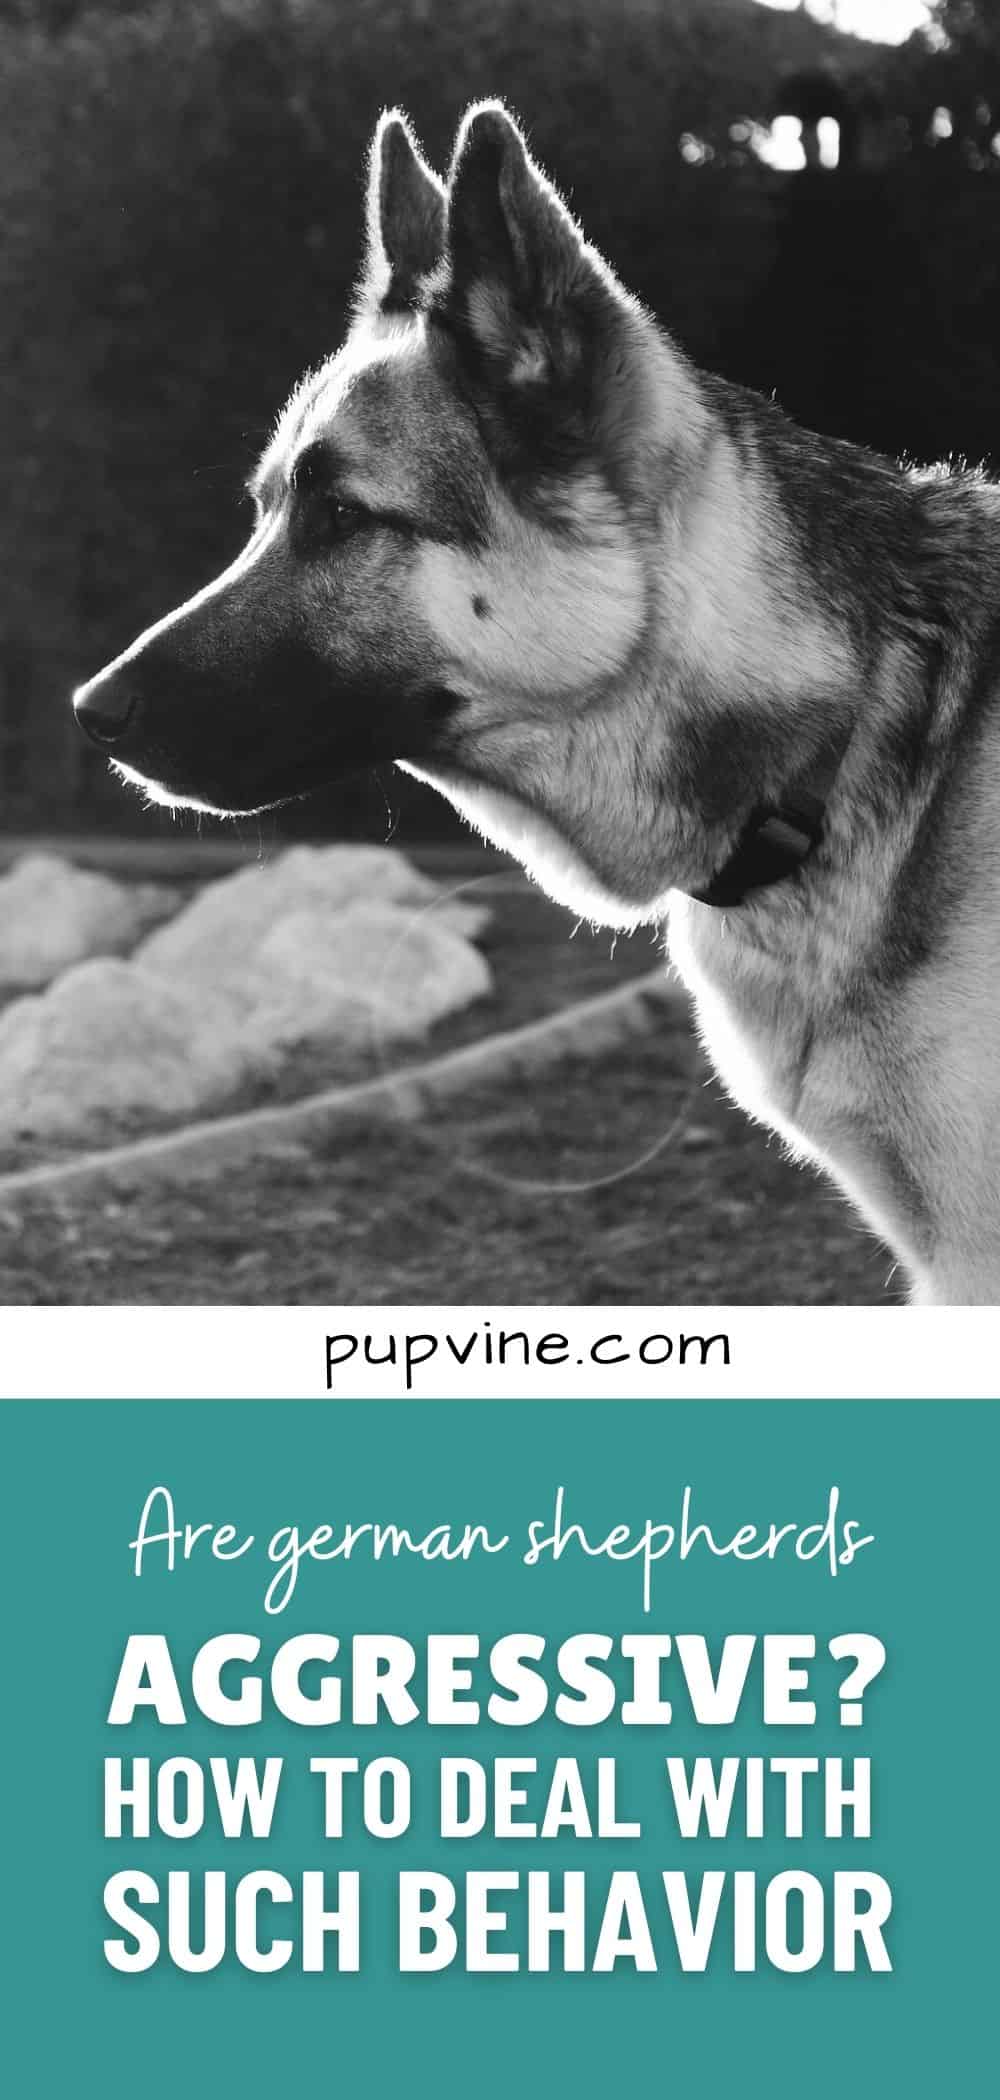 Are german shepherds Aggressive? How To Deal With Such Behavior